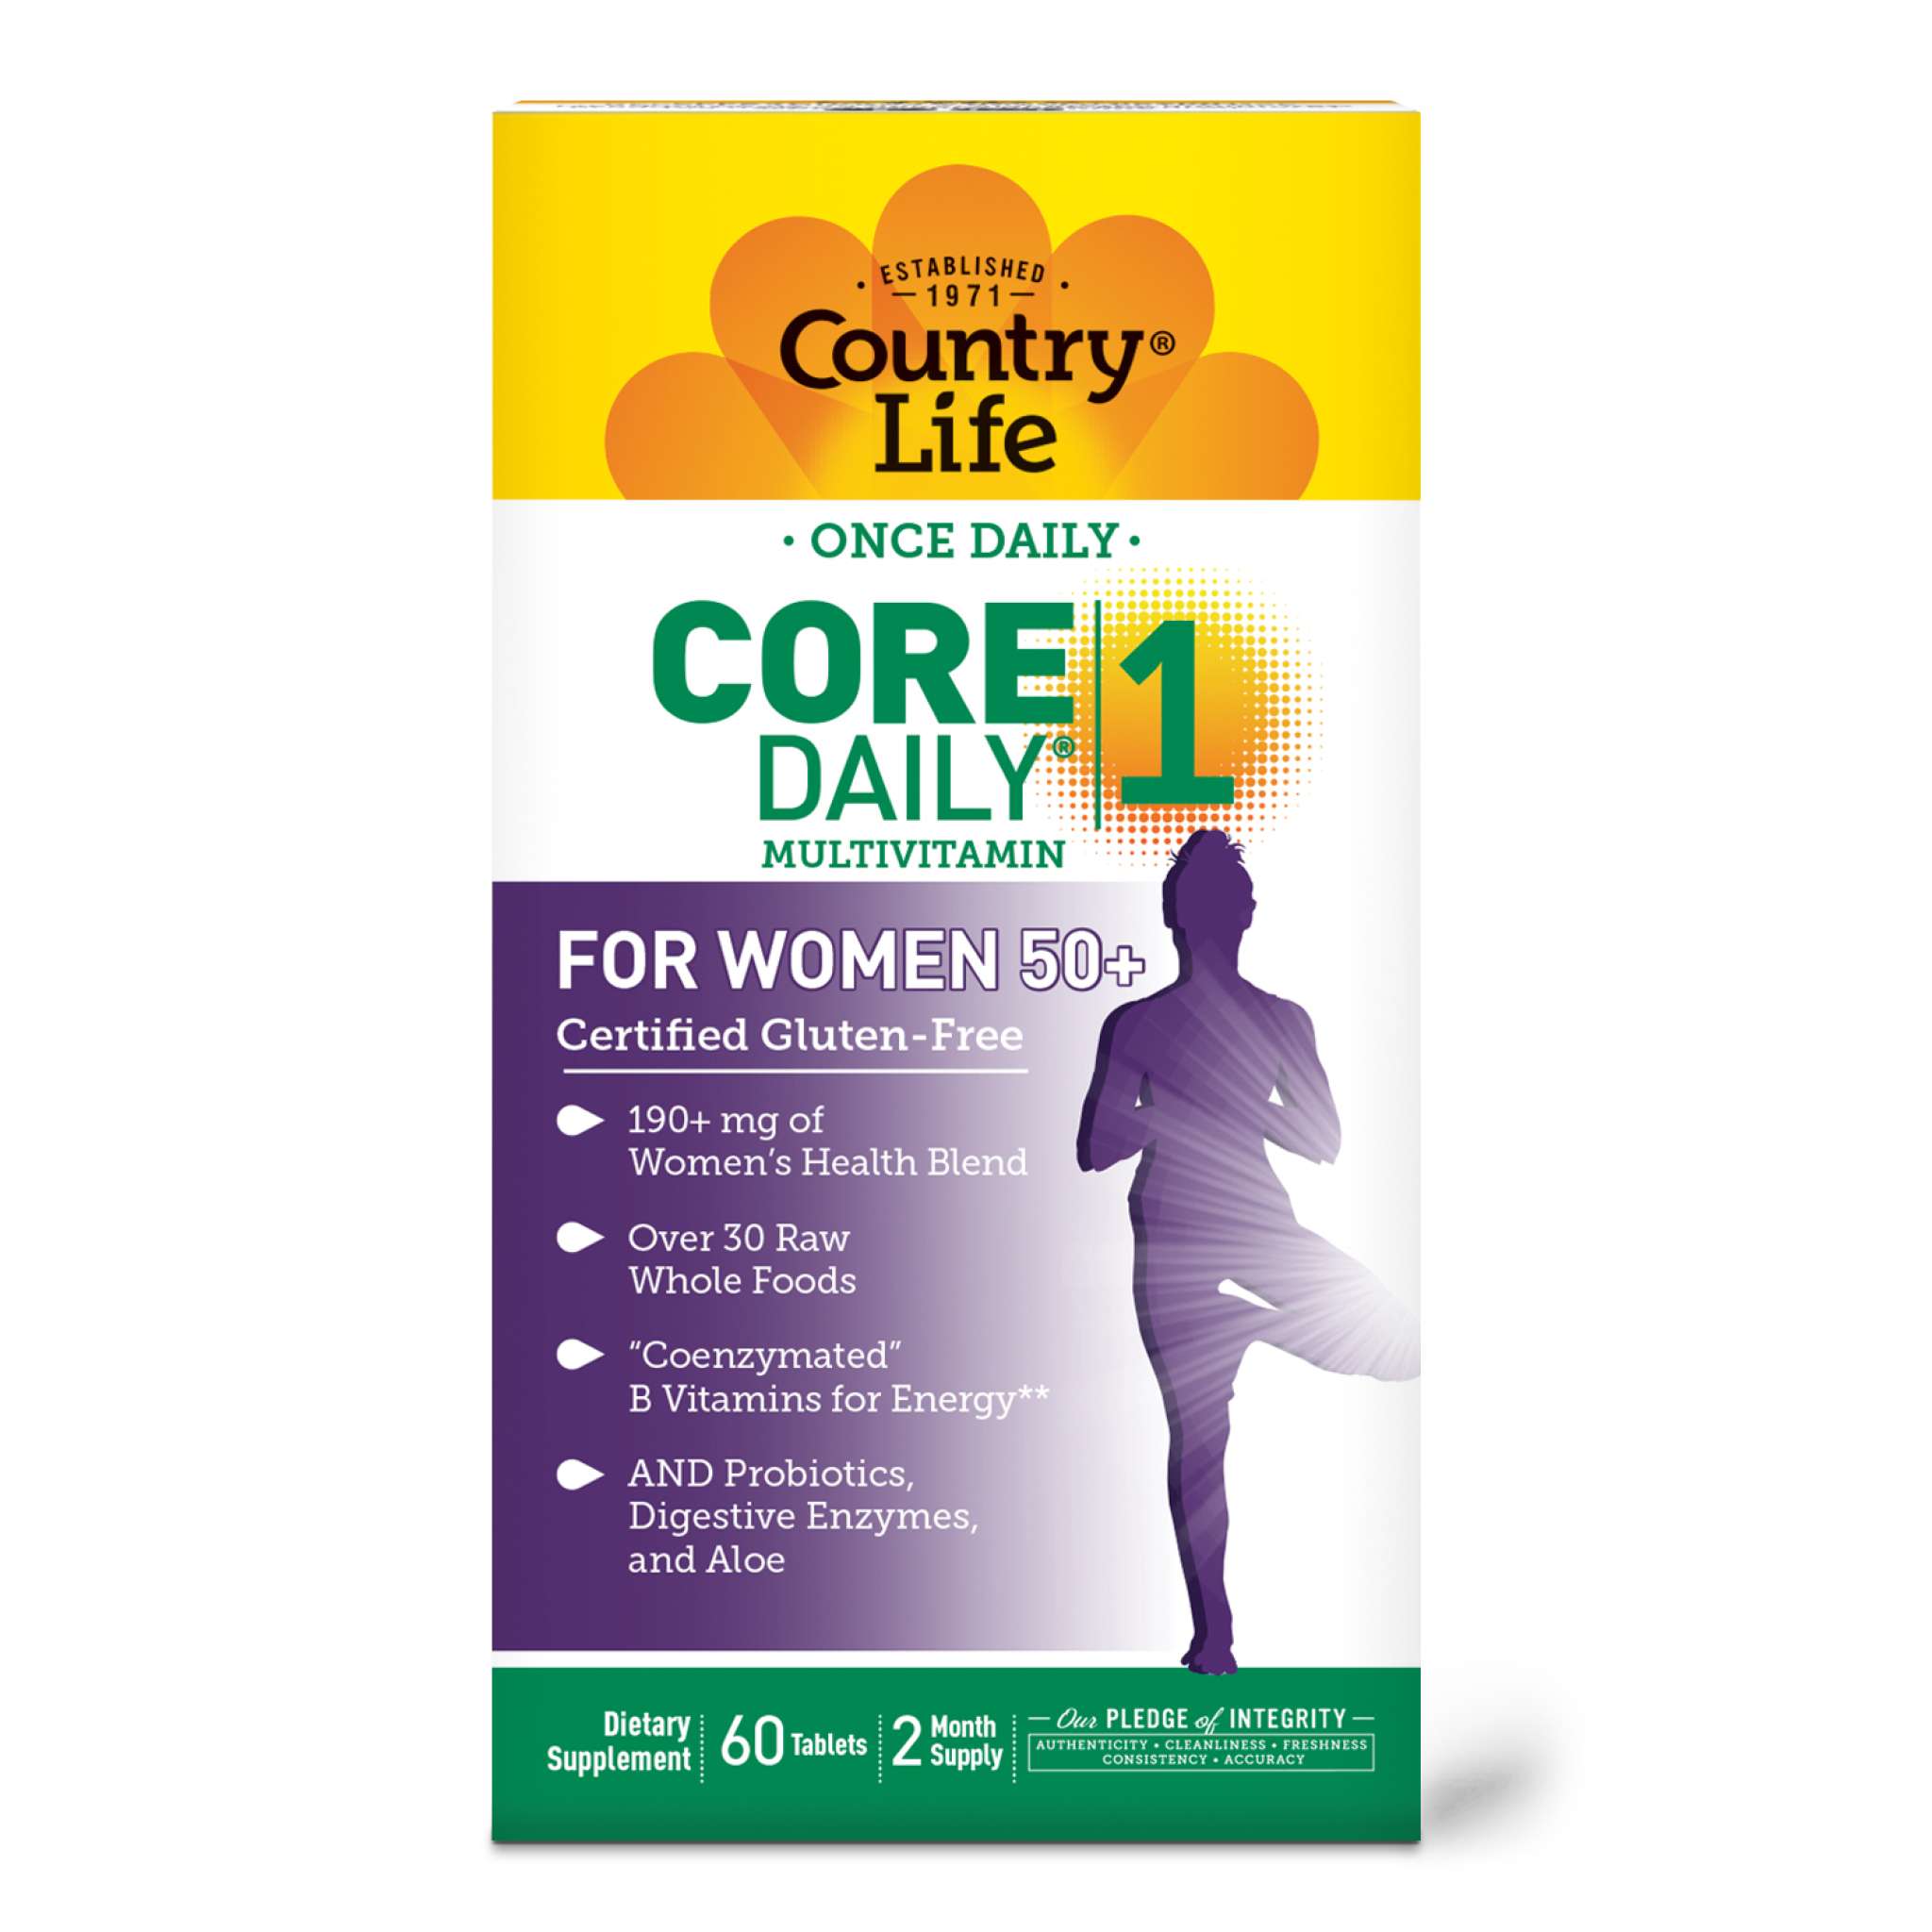 Country Life - Core Daily 1 For Women 50+